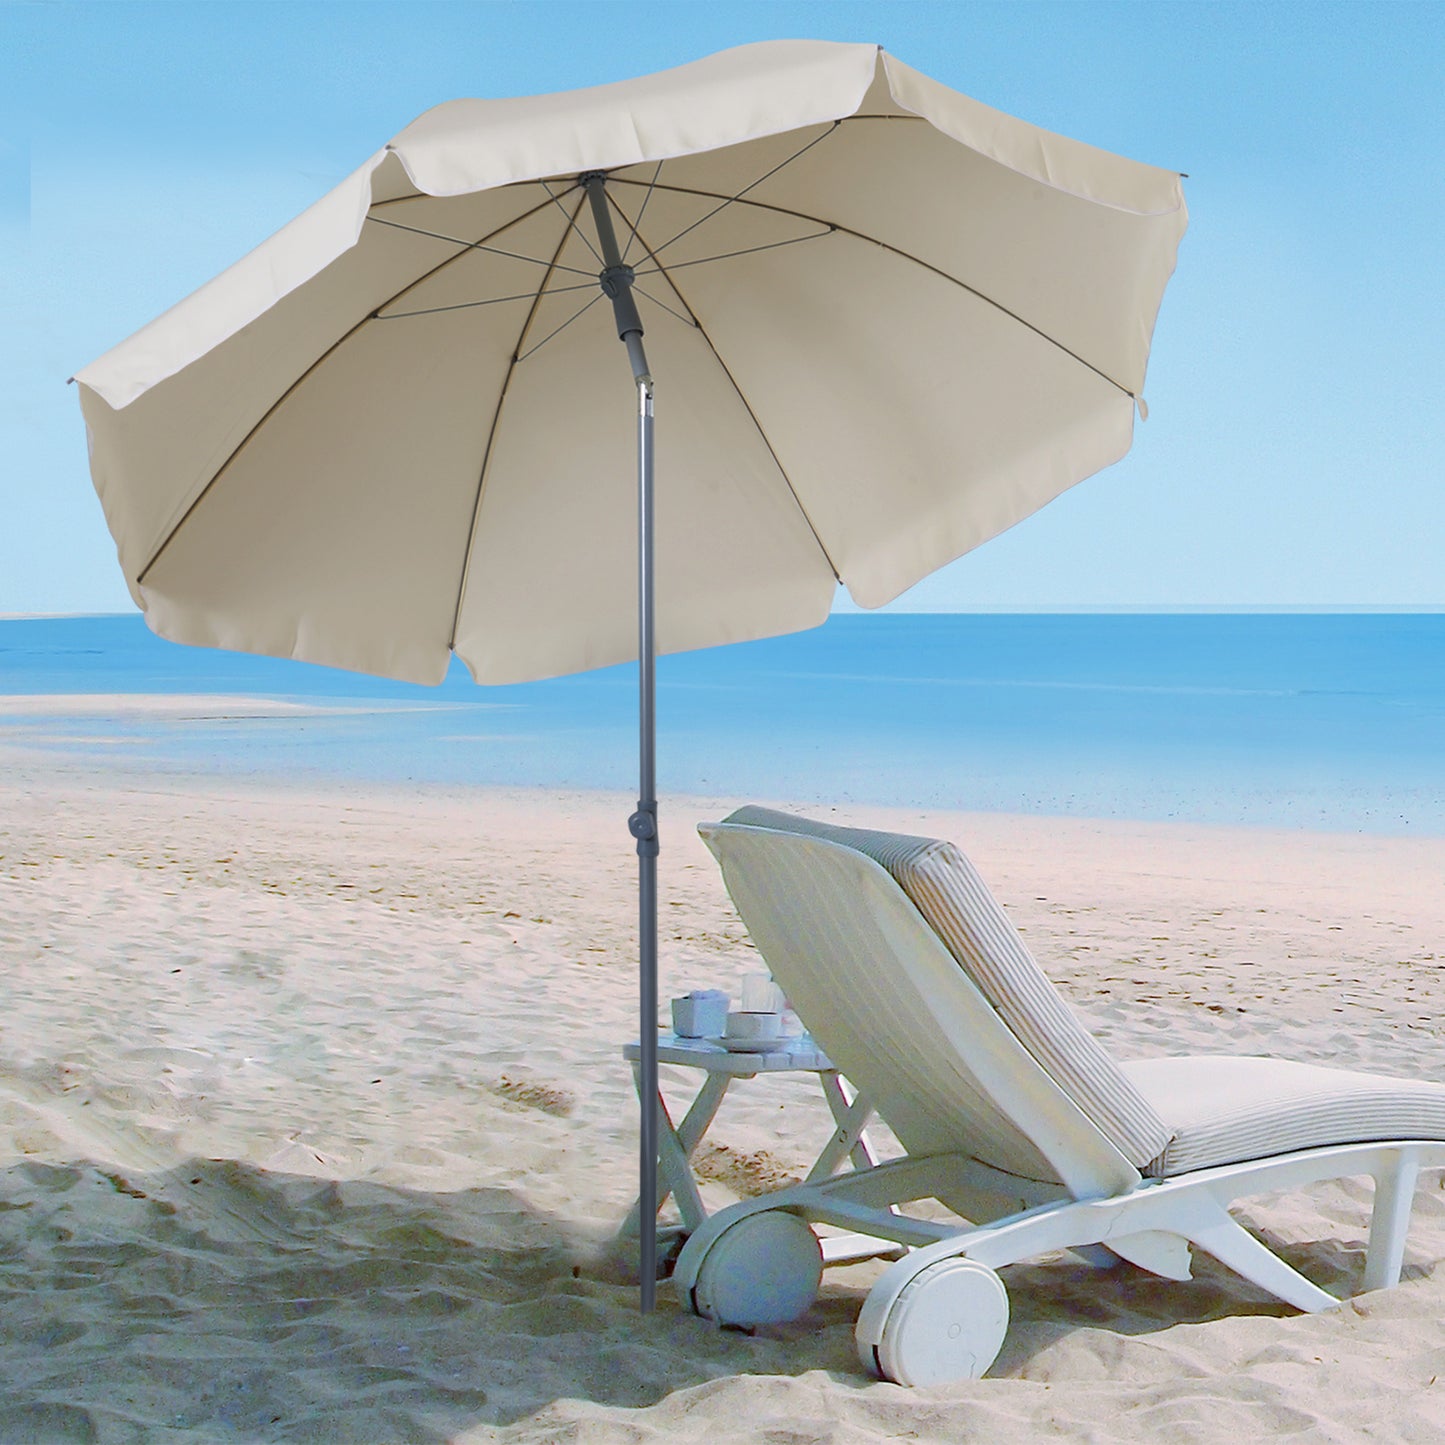 Outsunny Adjustable Beach Parasol: Elegant Cream Shade for Outdoor Relaxation, 2.2M